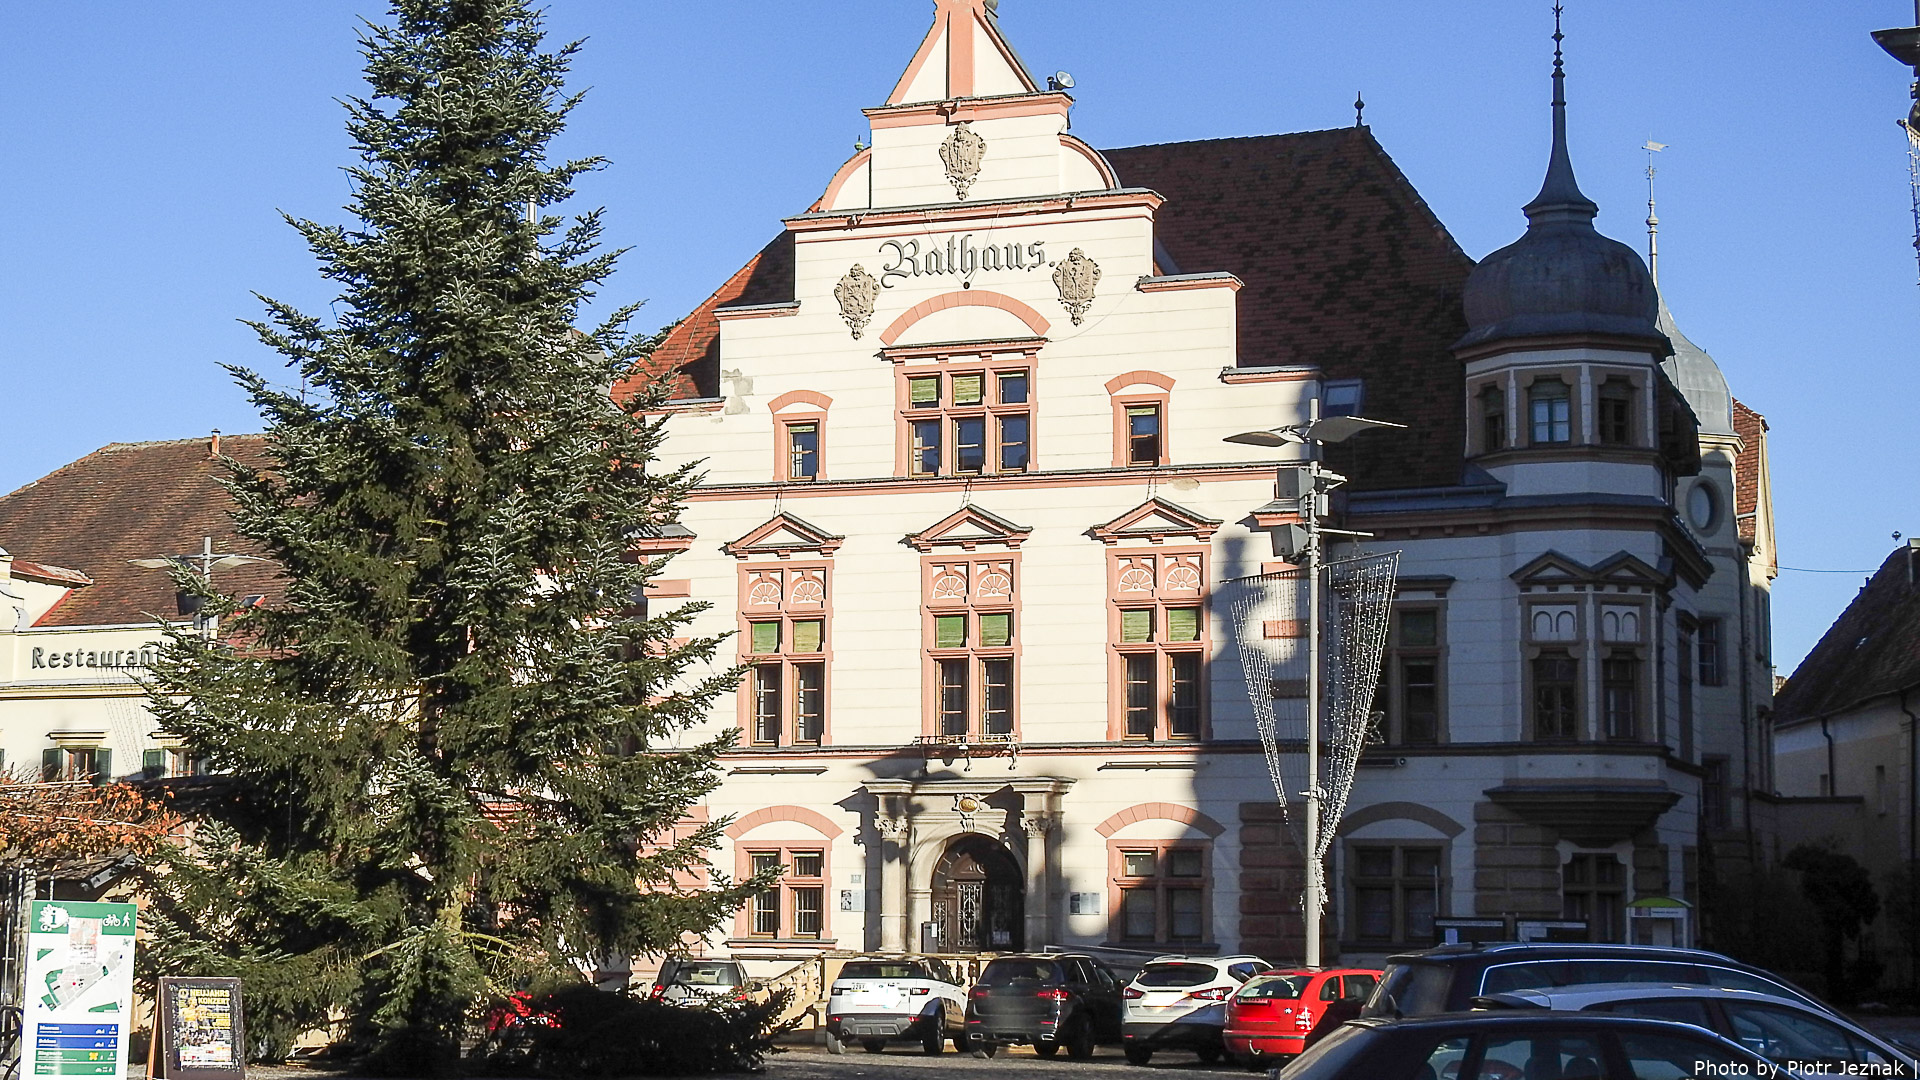 The town hall of Hartberg